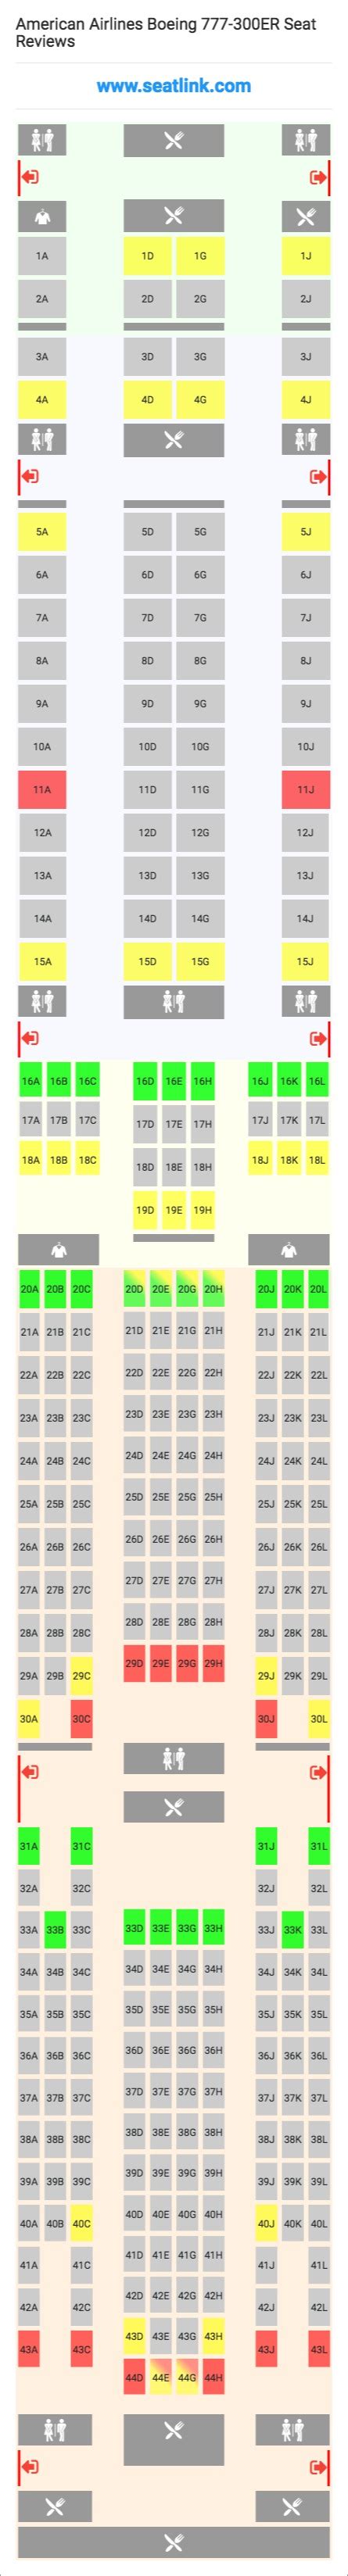 Delta Airlines Boeing Er Seat Map